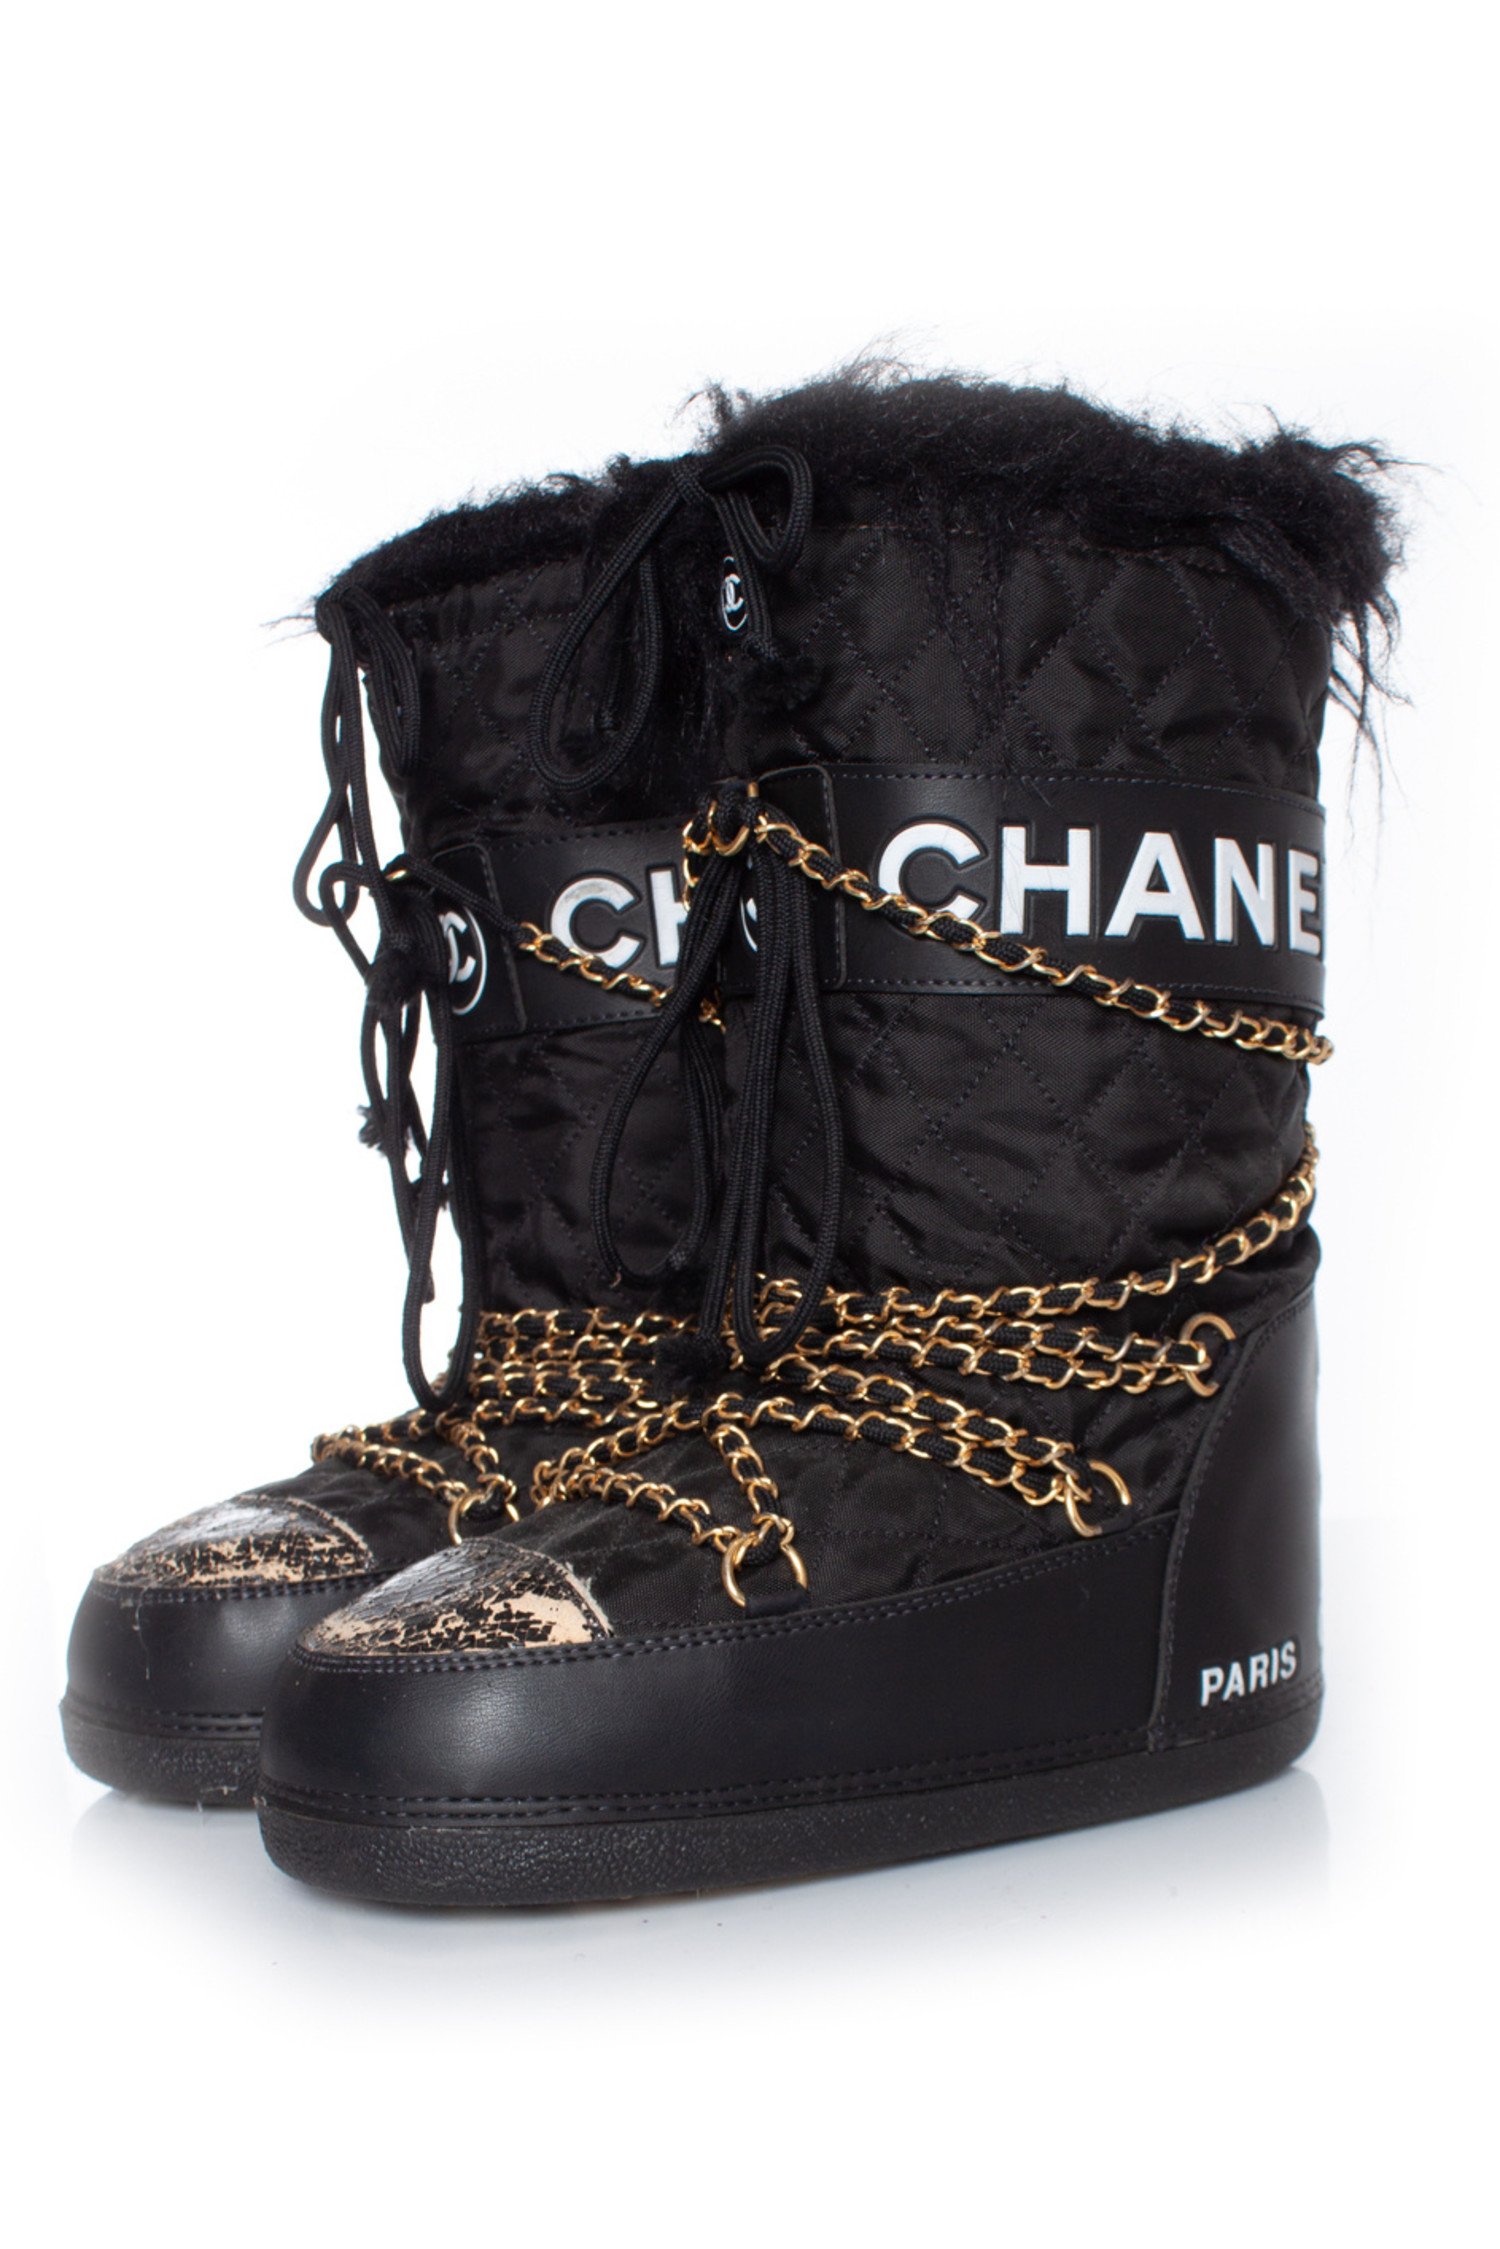 Chanel By Karl Lagerfeld Runway Snow Boots FallWinter 1993 at 1stDibs   chanel winter boots chanel snow boots karl lagerfeld moon boots